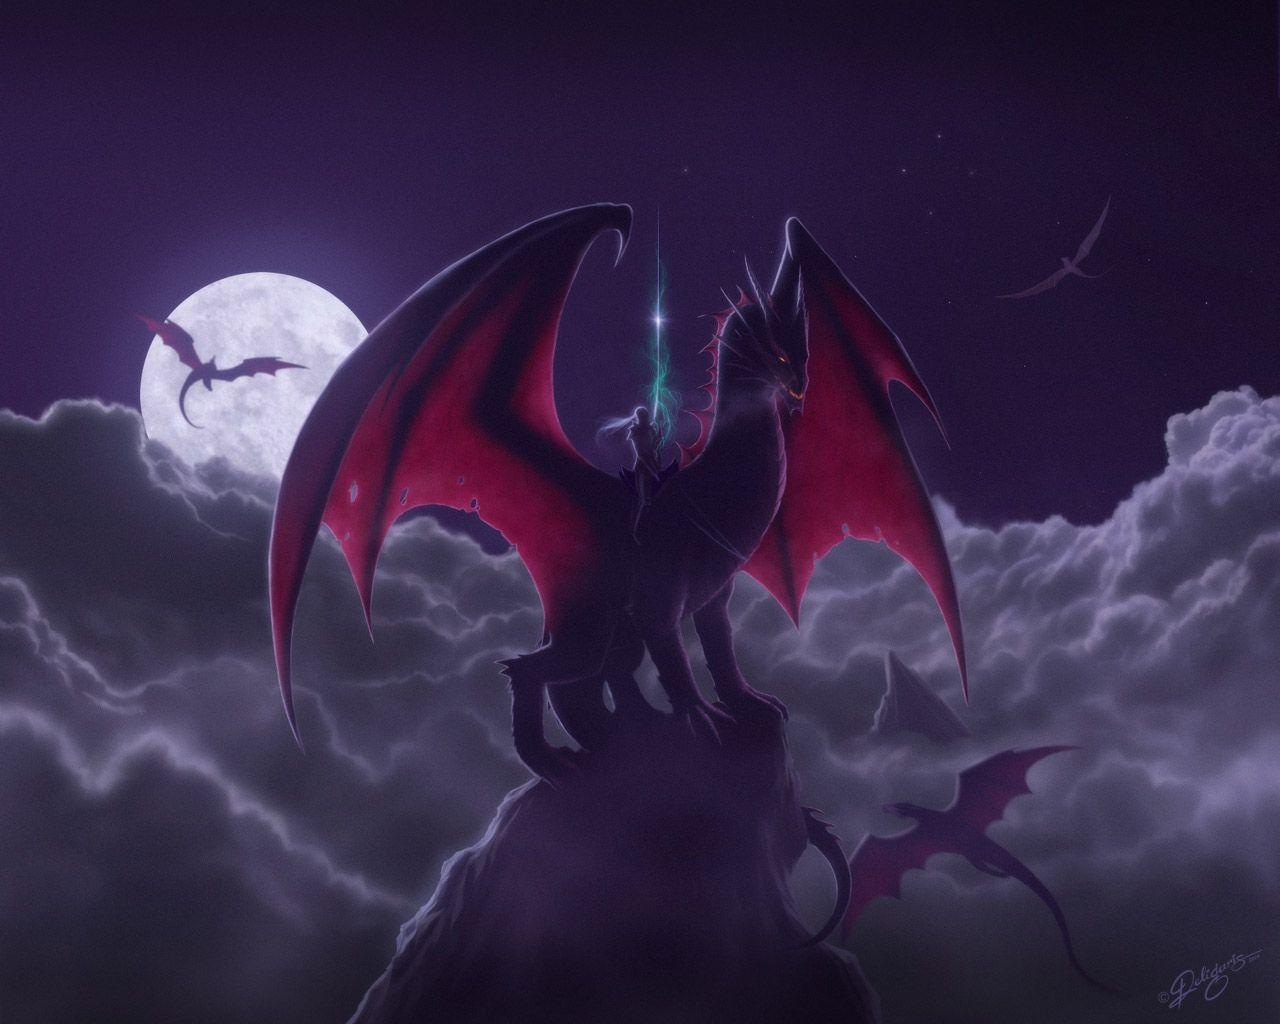 Night Clouds Dragons wallpaper from Dragons wallpaper